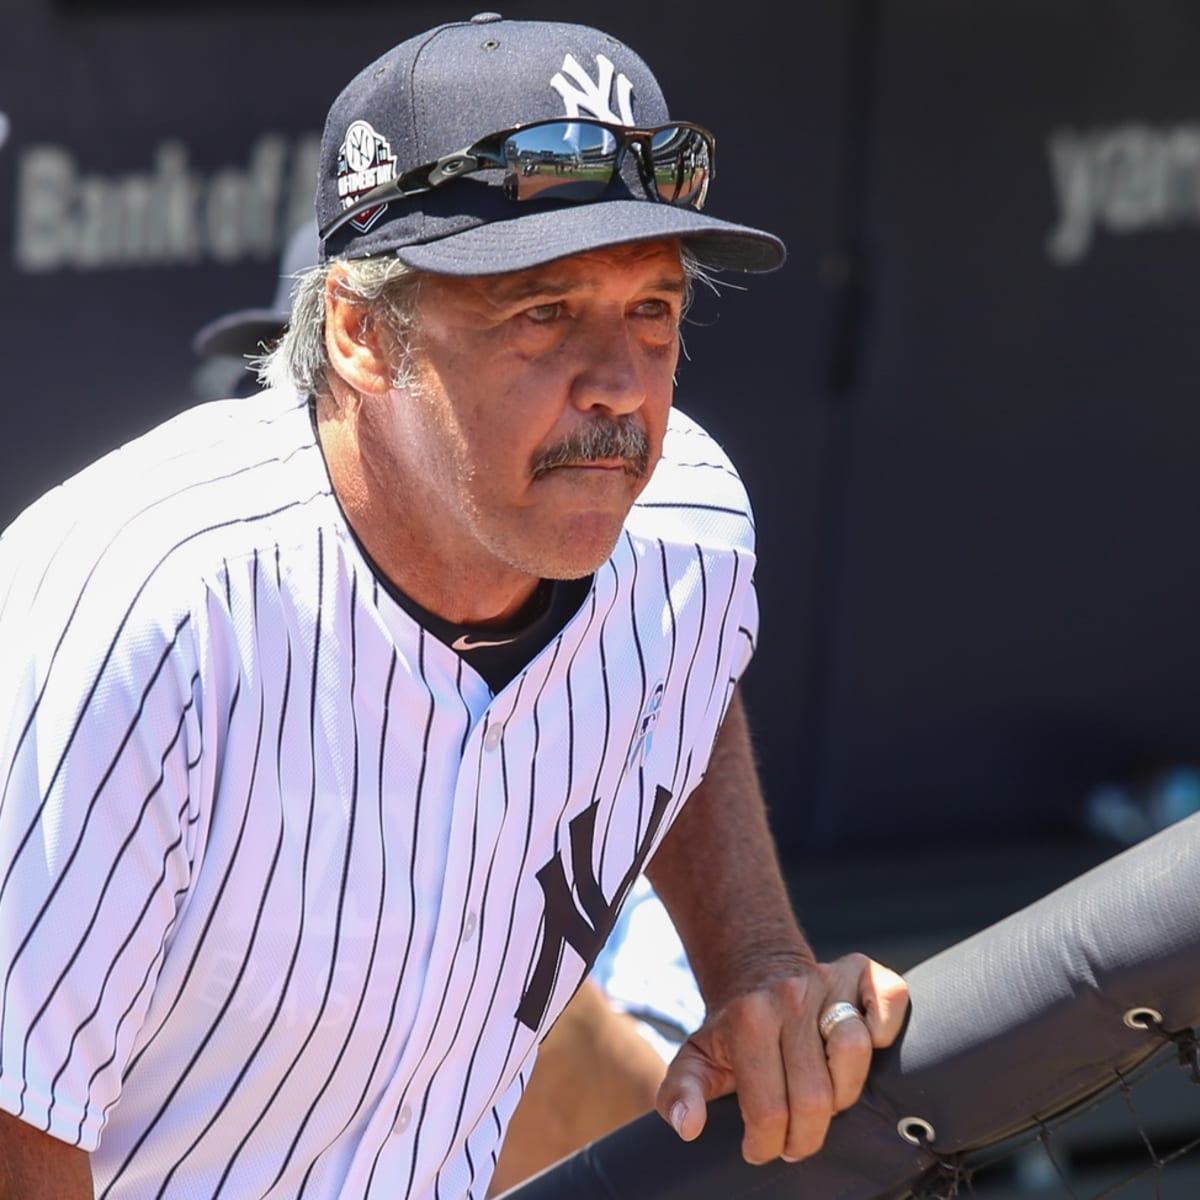 Ex-New York Yankees pitcher Ron Guidry: 'My story took off' from